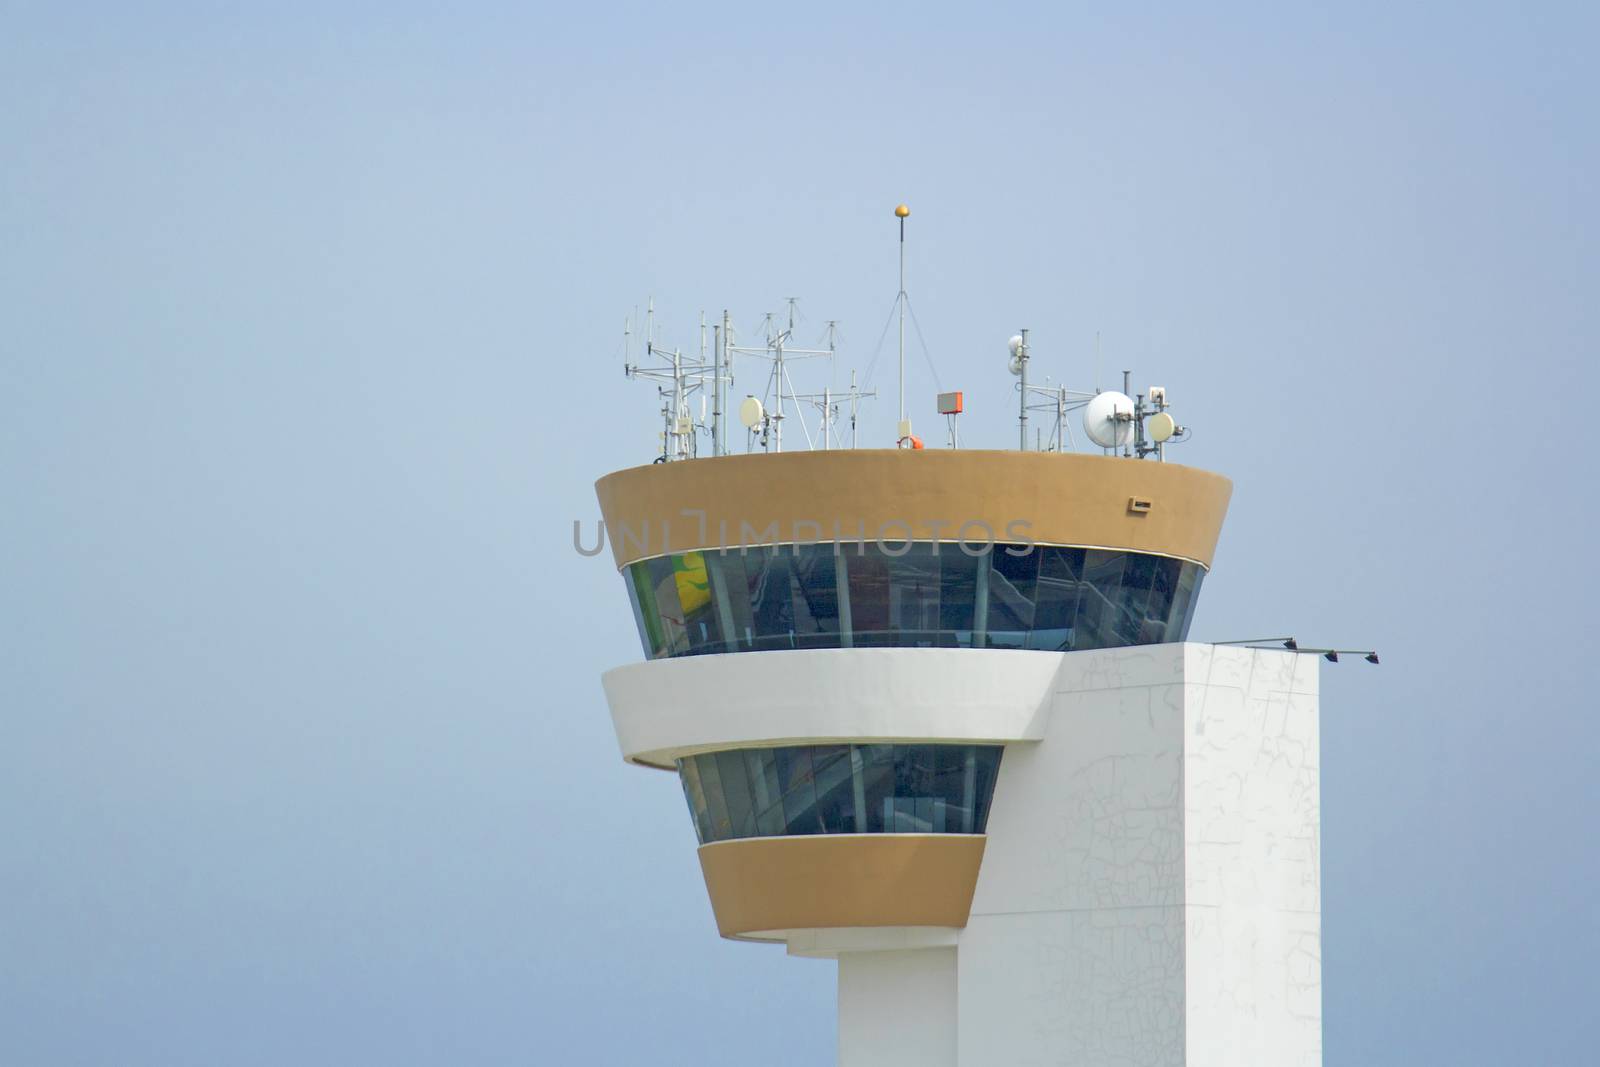 Airport control tower in the daylight by TakerWalker